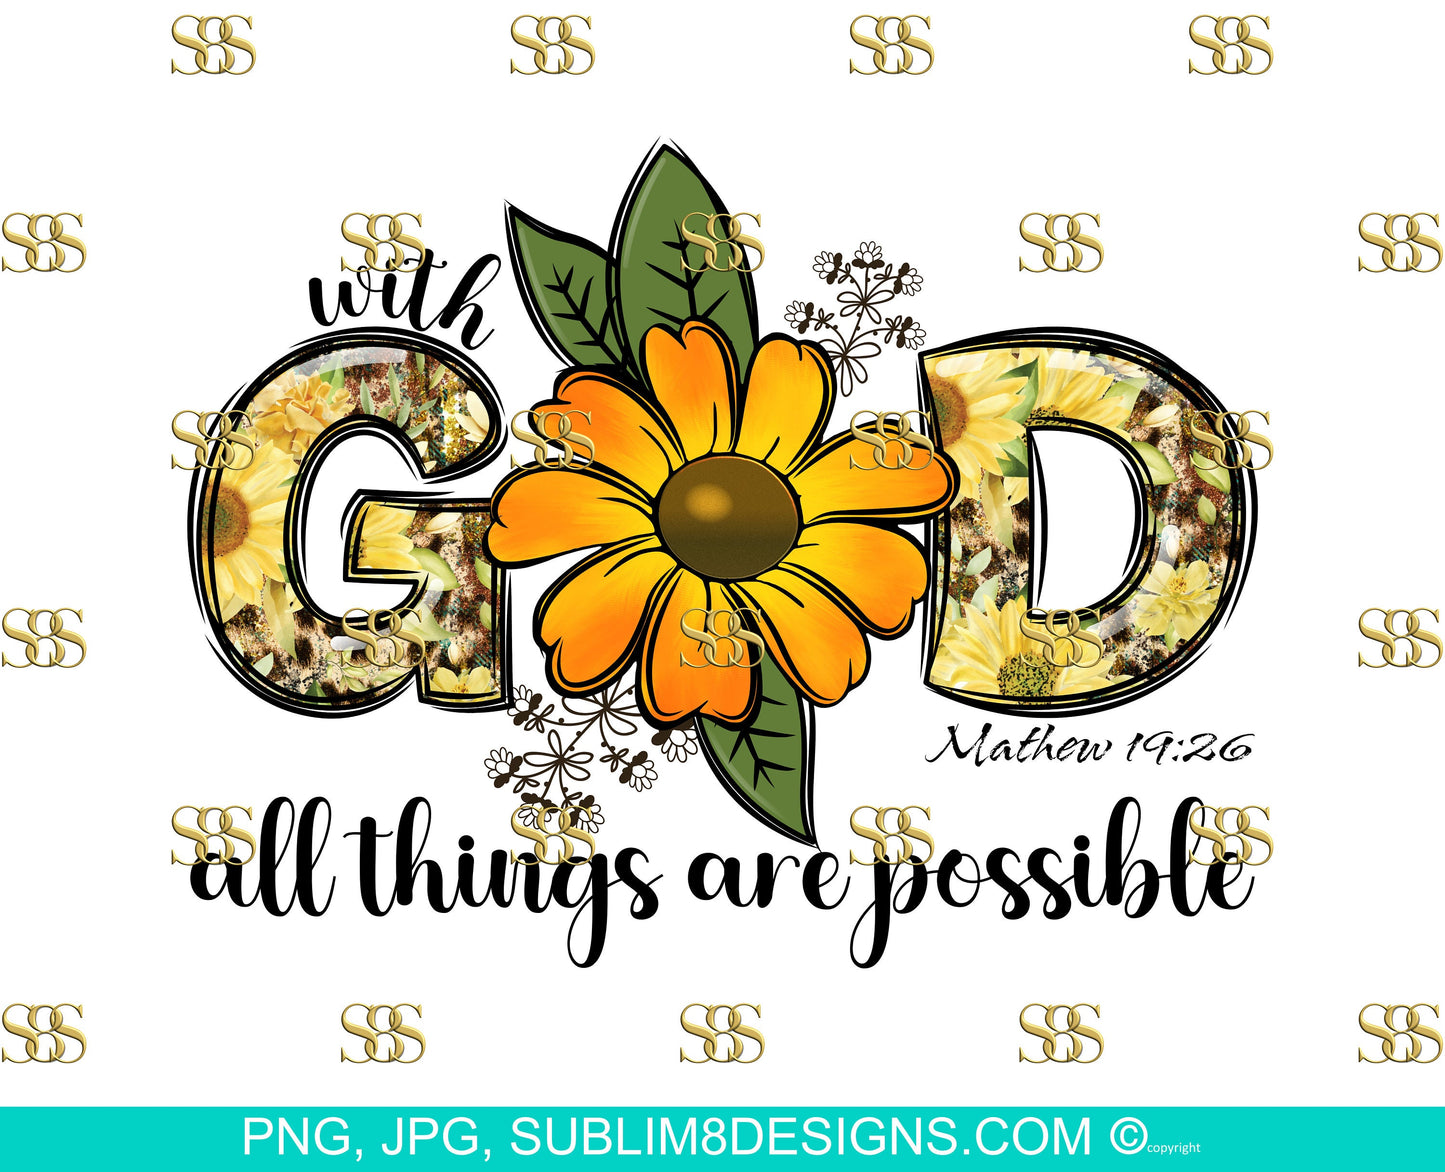 With God All Things Are Possible Mathew 19:26 PNG and JPG ONLY